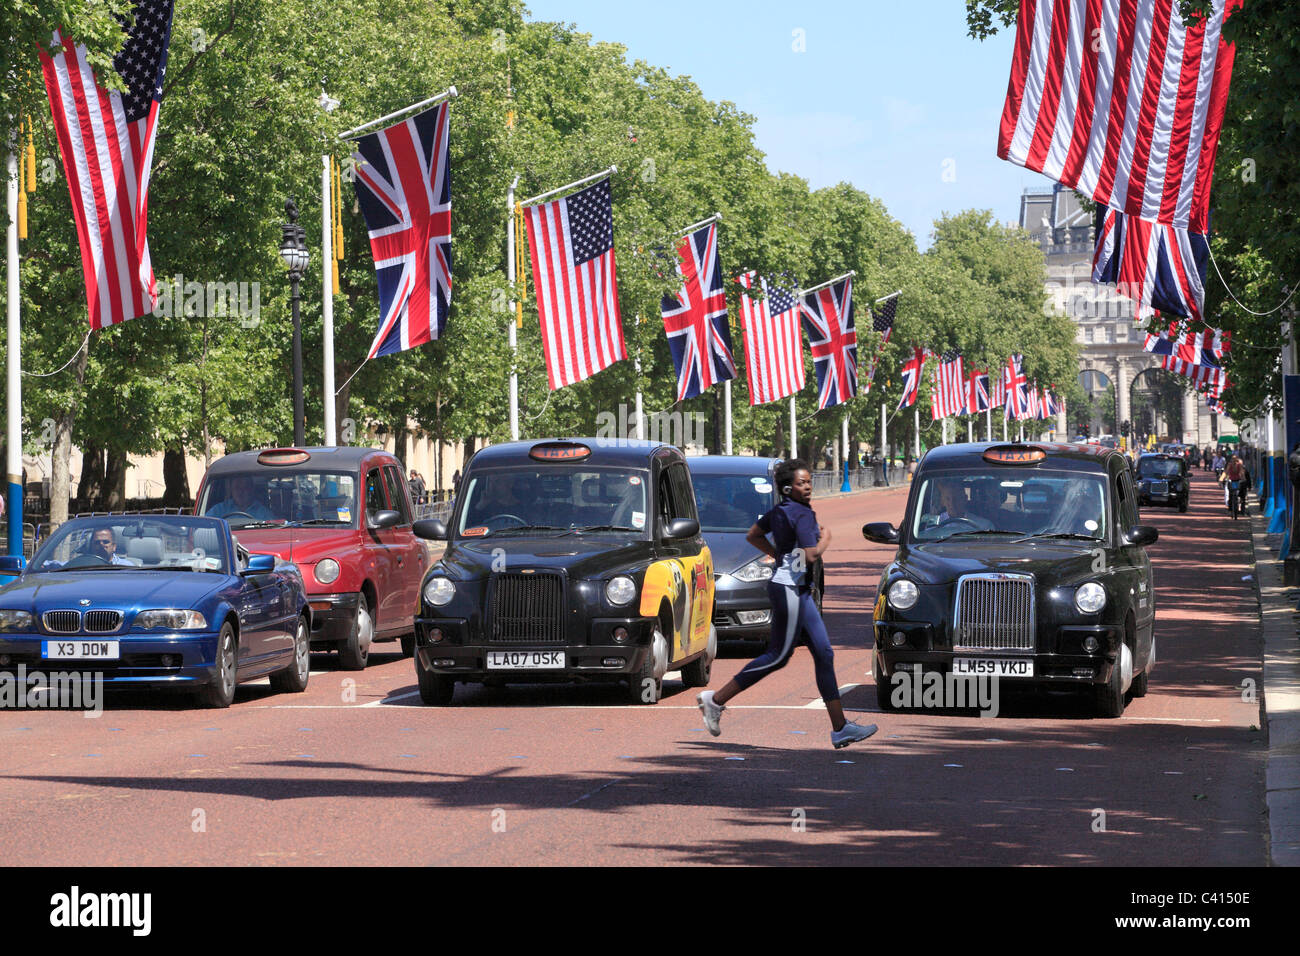 Taxis in The Mall with UK and USA Flags on occasion of Visit by President Obama Stock Photo